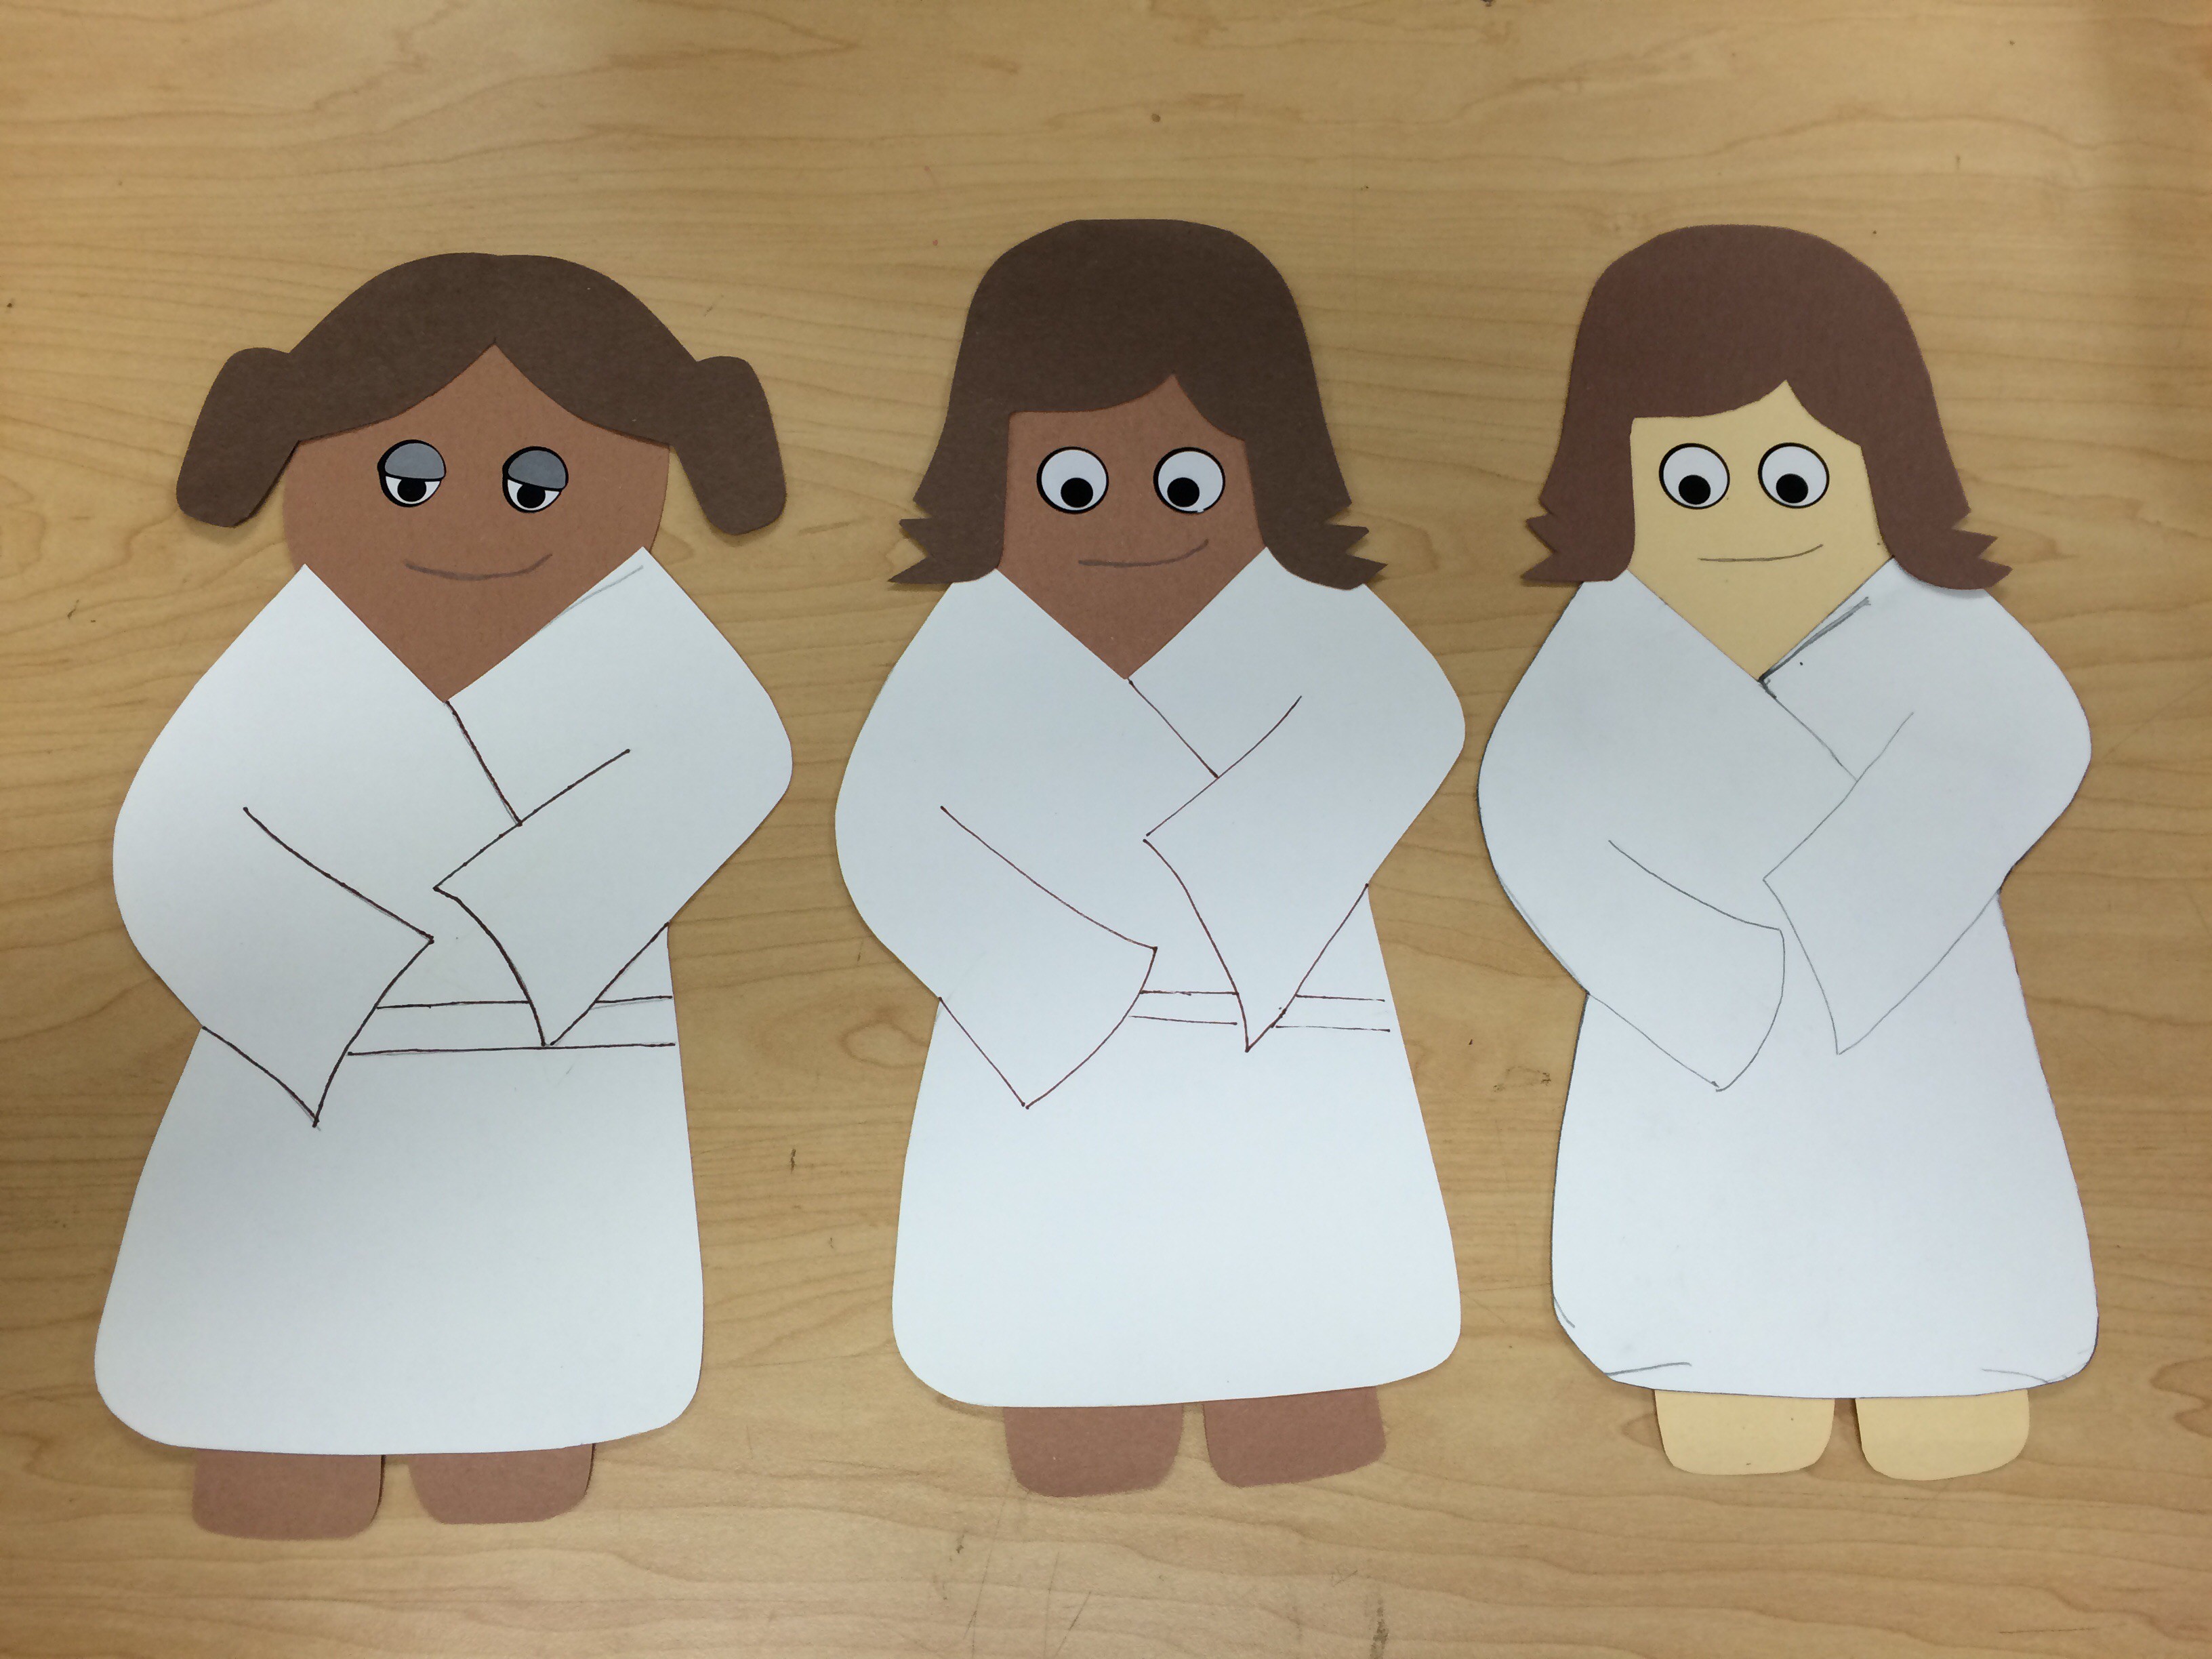 Easy Star Wars Craft with Construction Paper: Leia, Luke, Yoda, and Darth  Vader